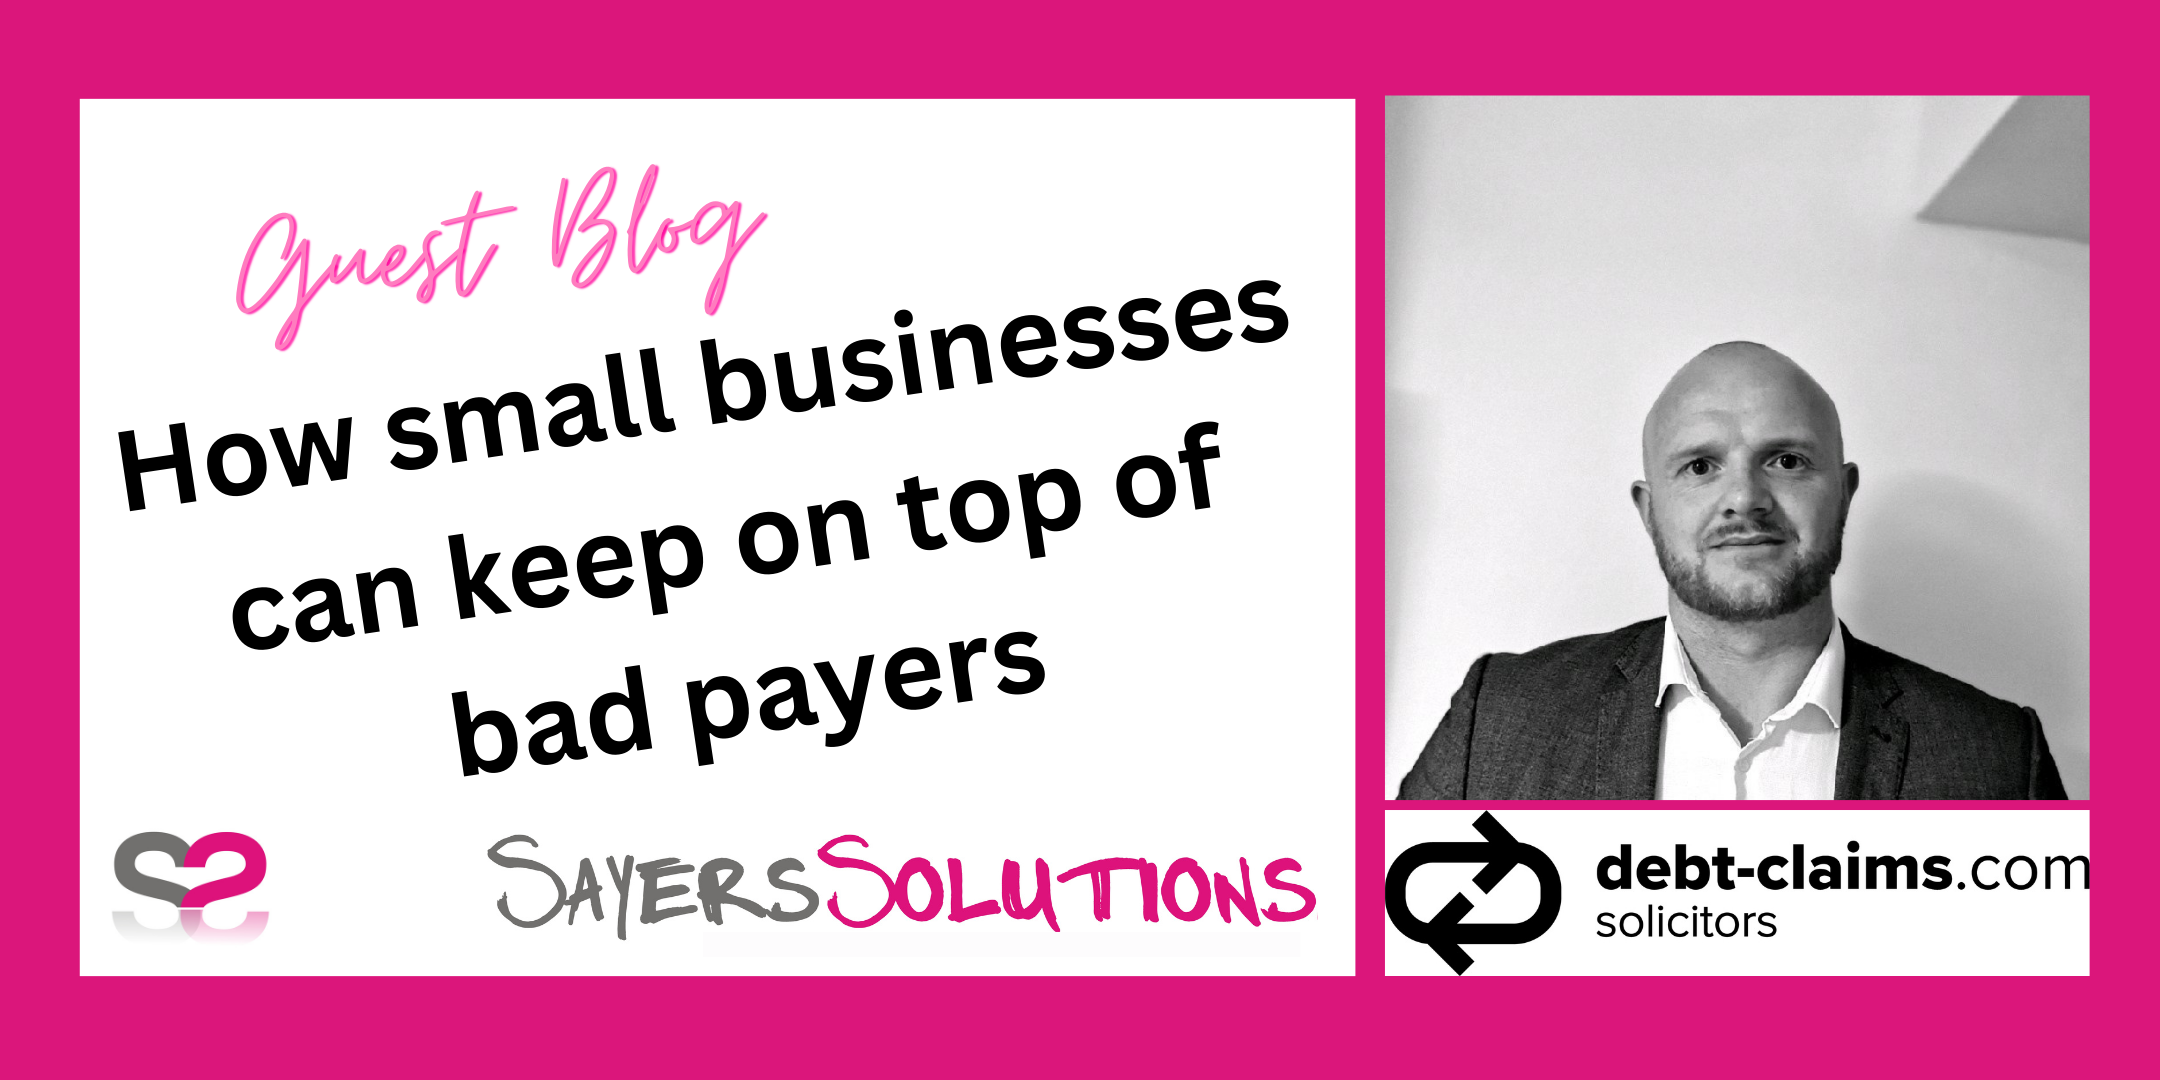 How small businesses can keep on top of bad payers